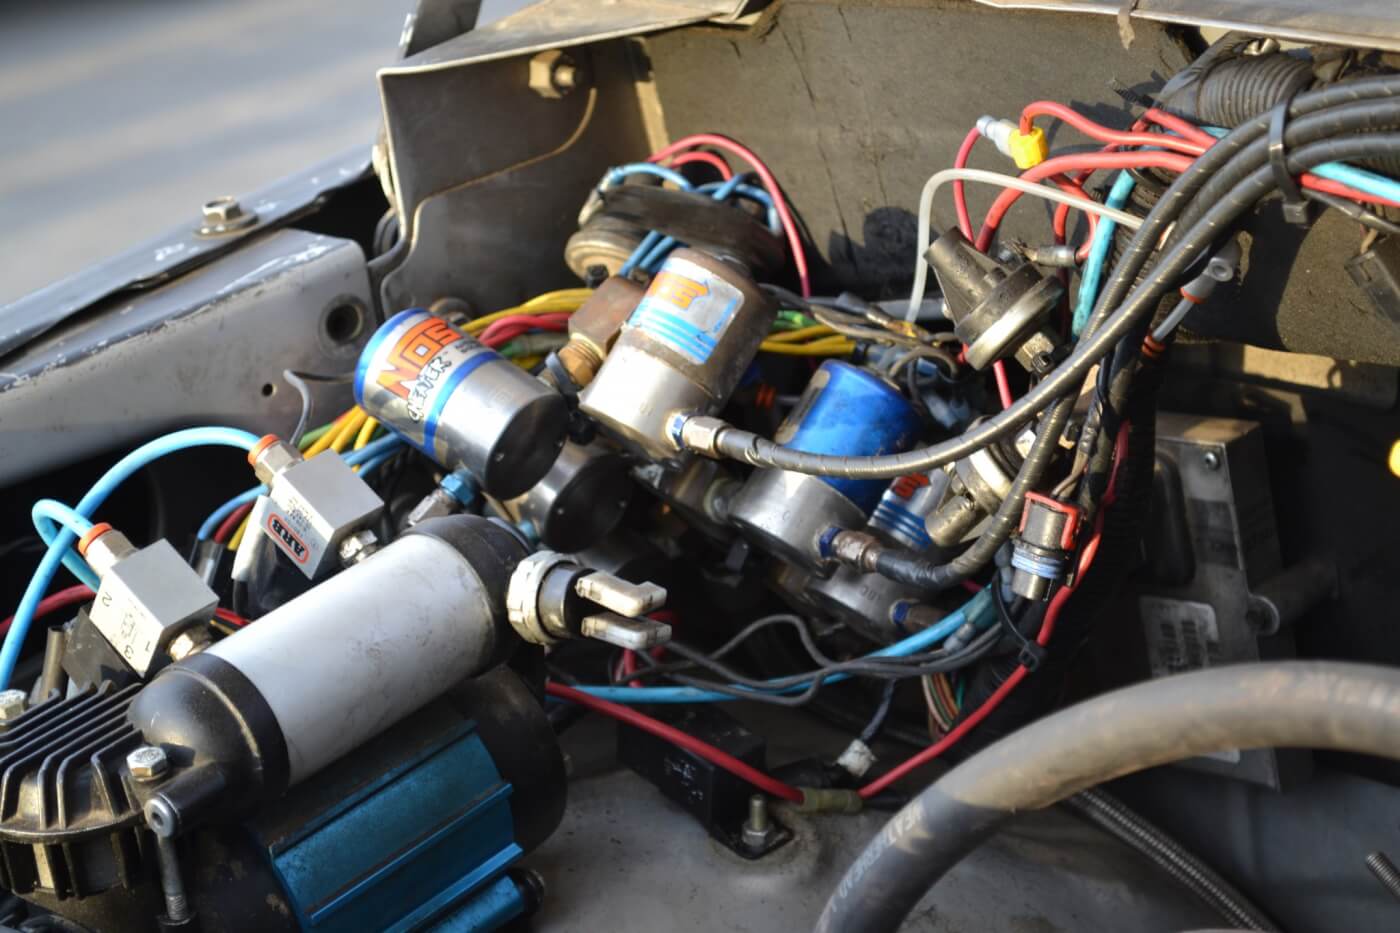 13. Often, racers find it easier to simply add another complete nitrous kit rather than upgrade bottles, solenoids, and nozzles separately. Serious giggle gas junkies will often have four, five or even six solenoids on a single engine.